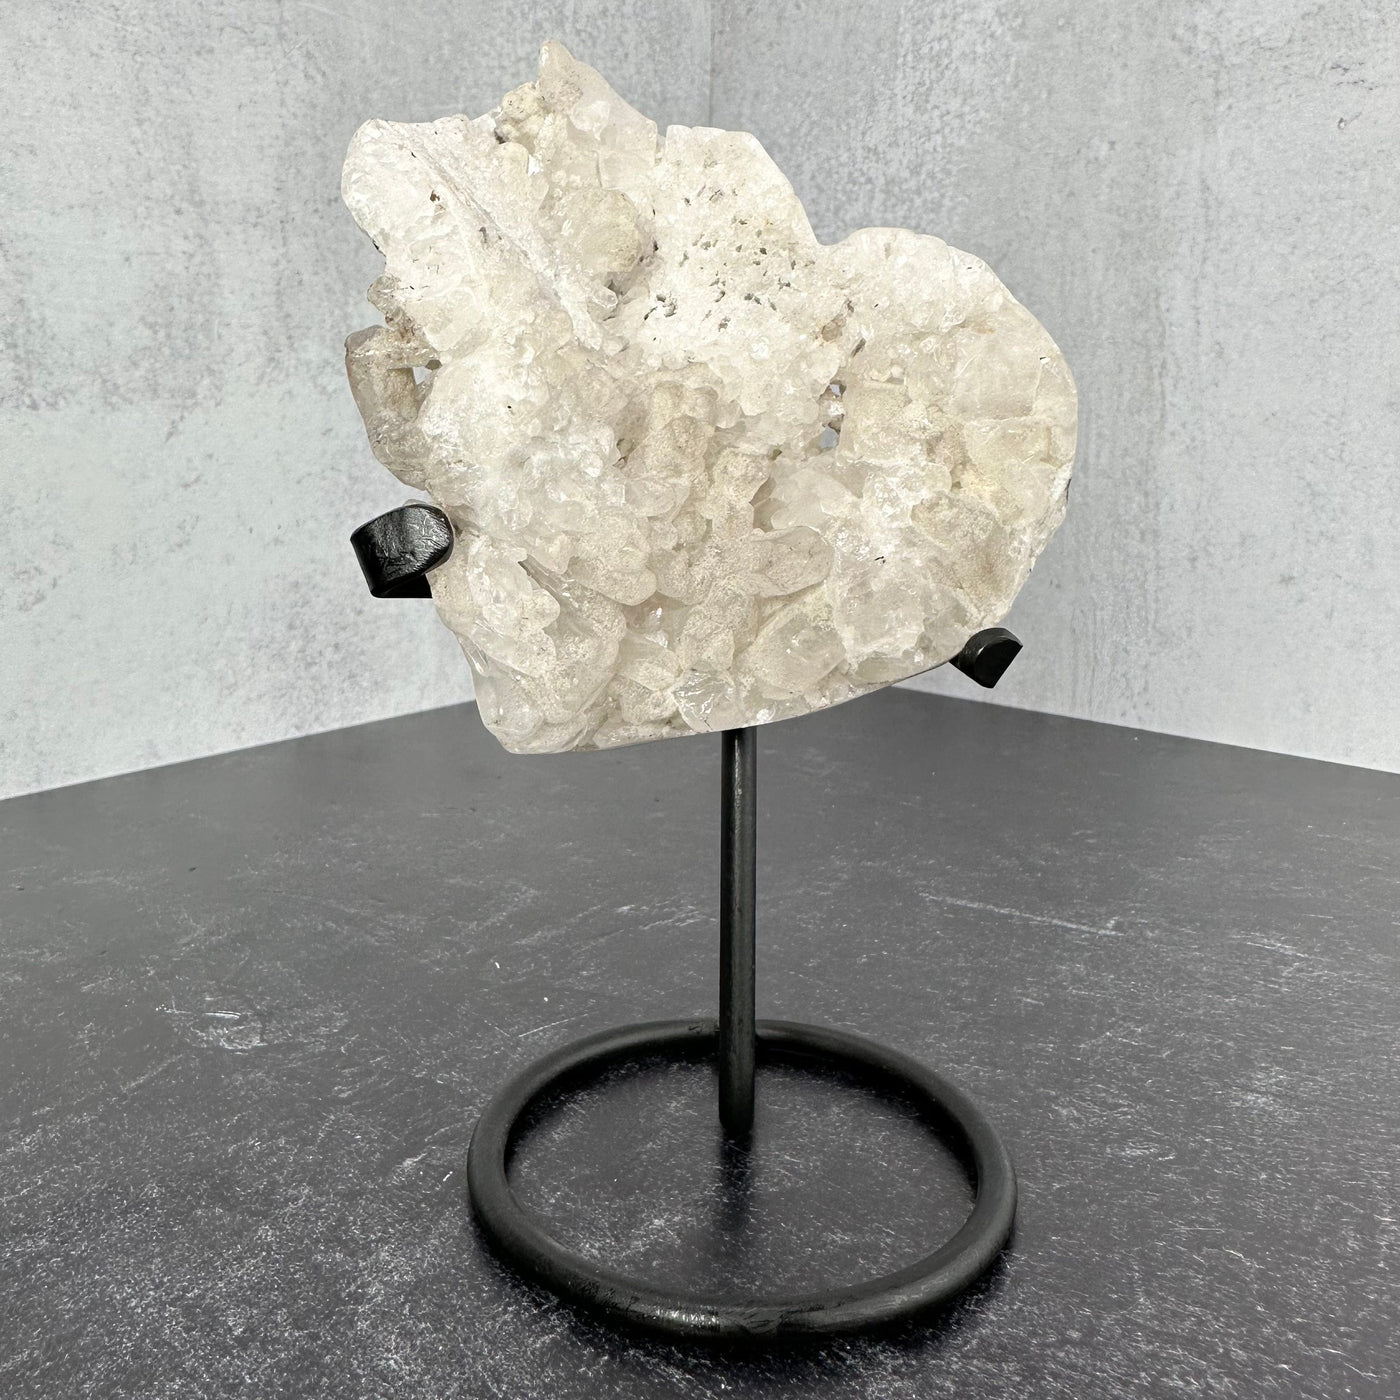 Frontal view of Crystal Quartz Abstract Heart on Metal Stand on a black surface.